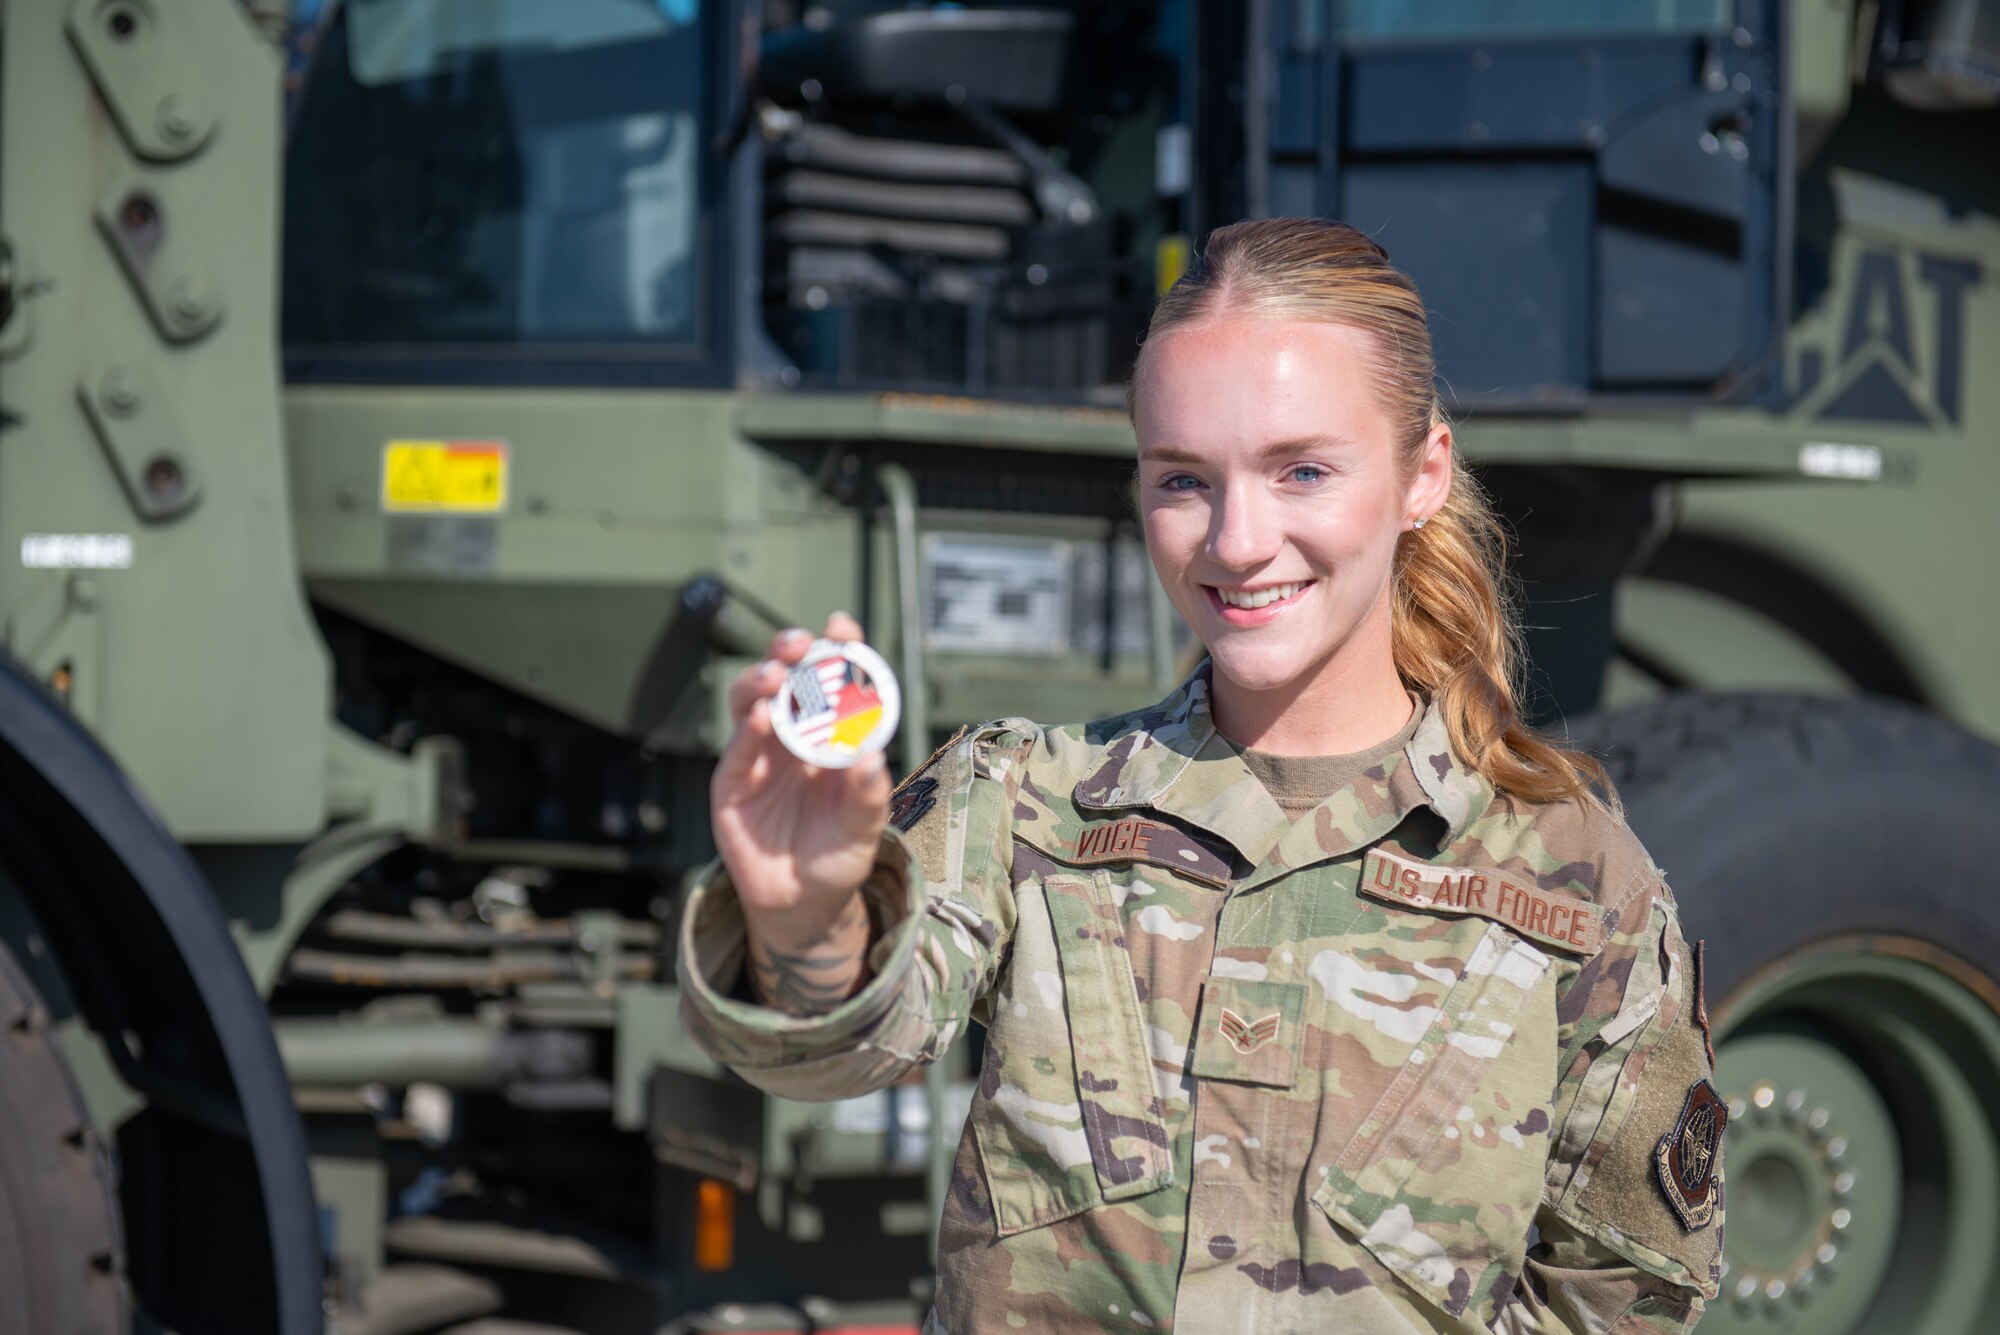 Airman holds up a coin